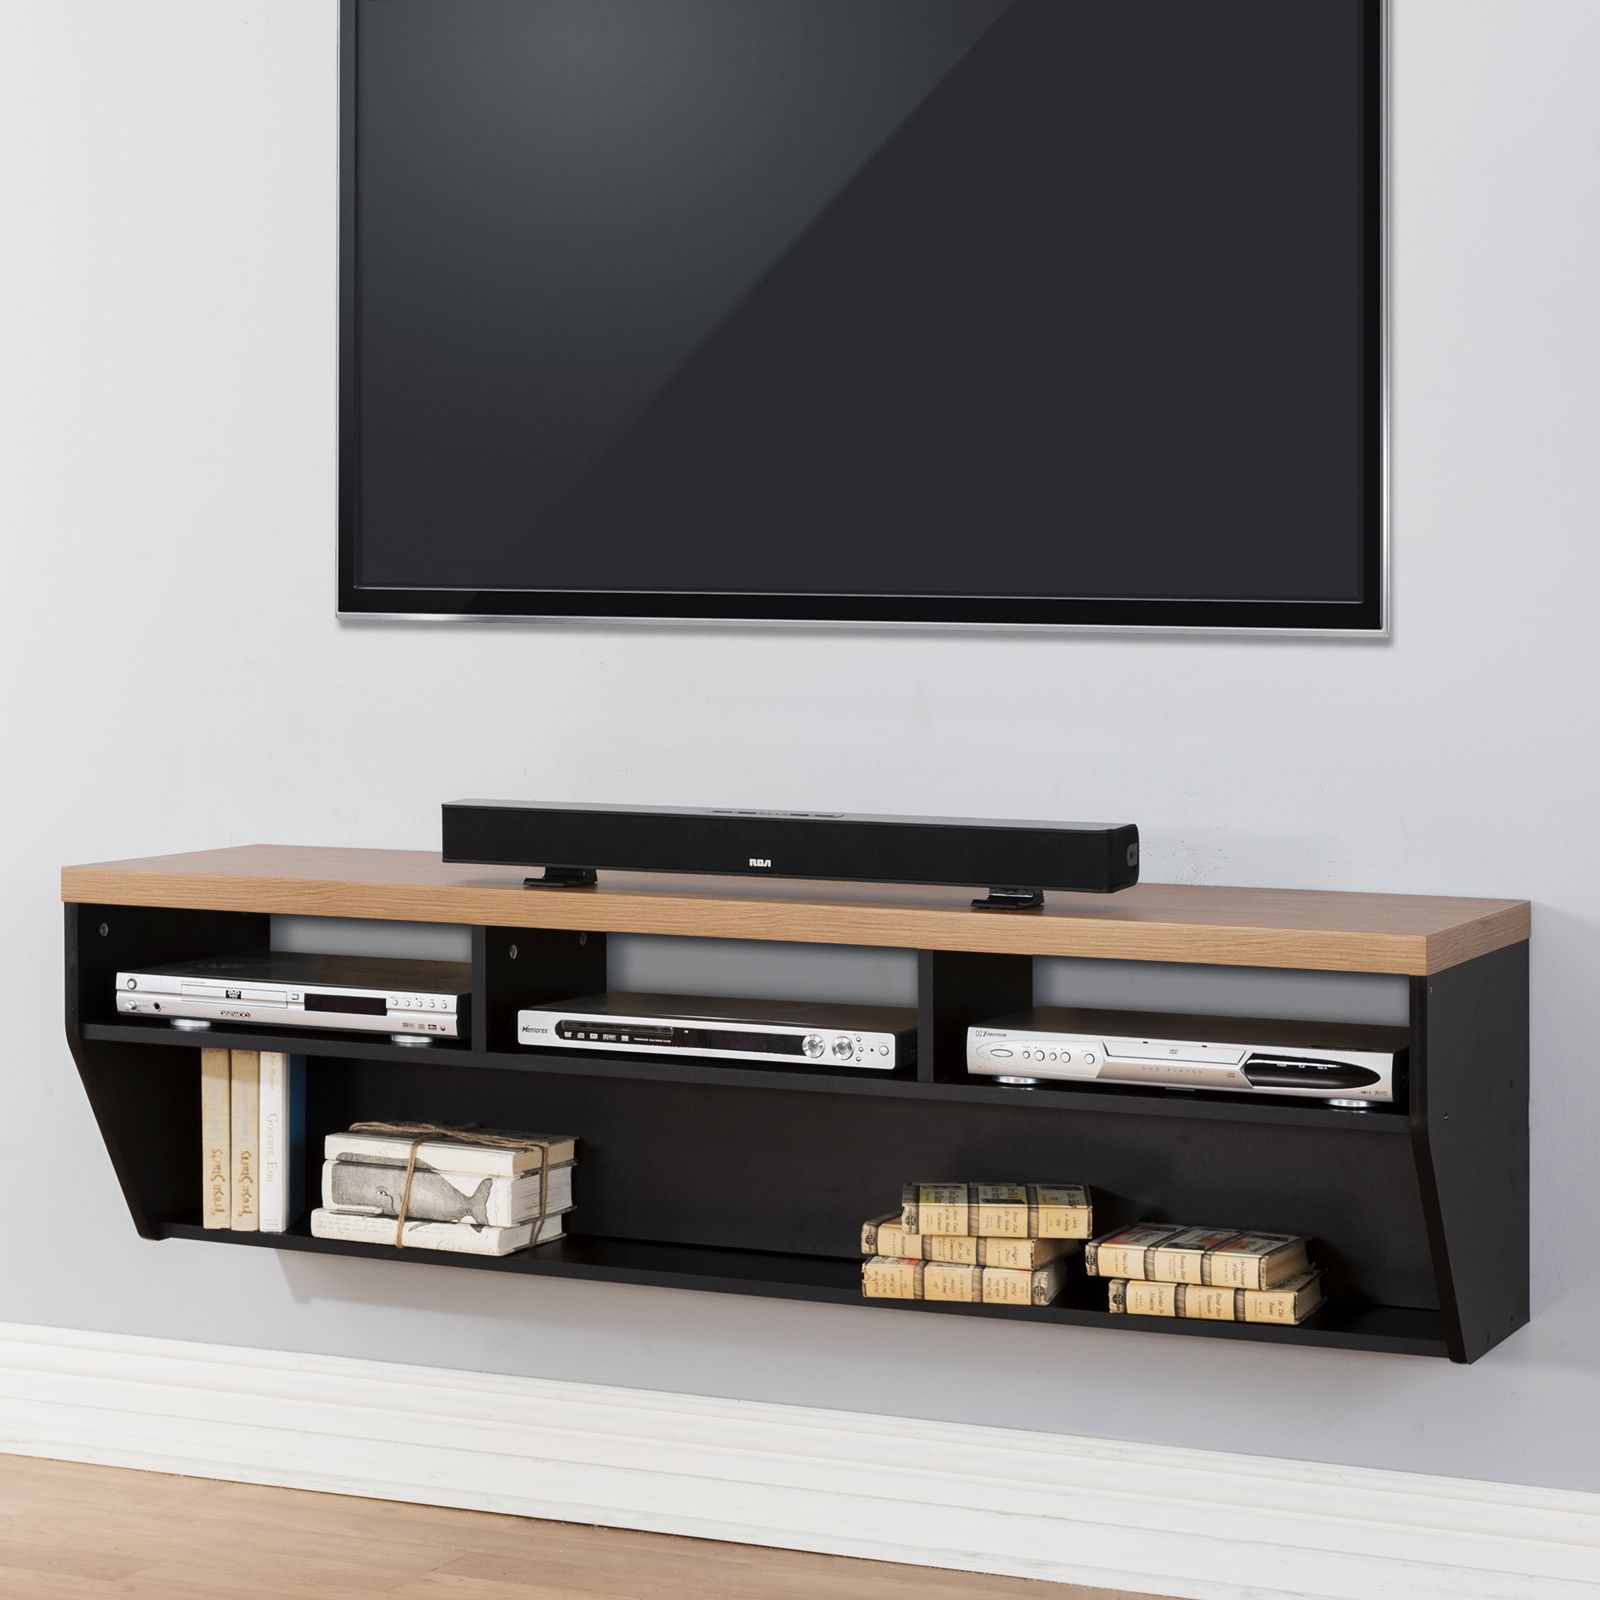 Martin Furniture Angled Sides Wall Mounted Tv Shelf – Tv Regarding Shelves For Tvs On The Wall (View 2 of 15)